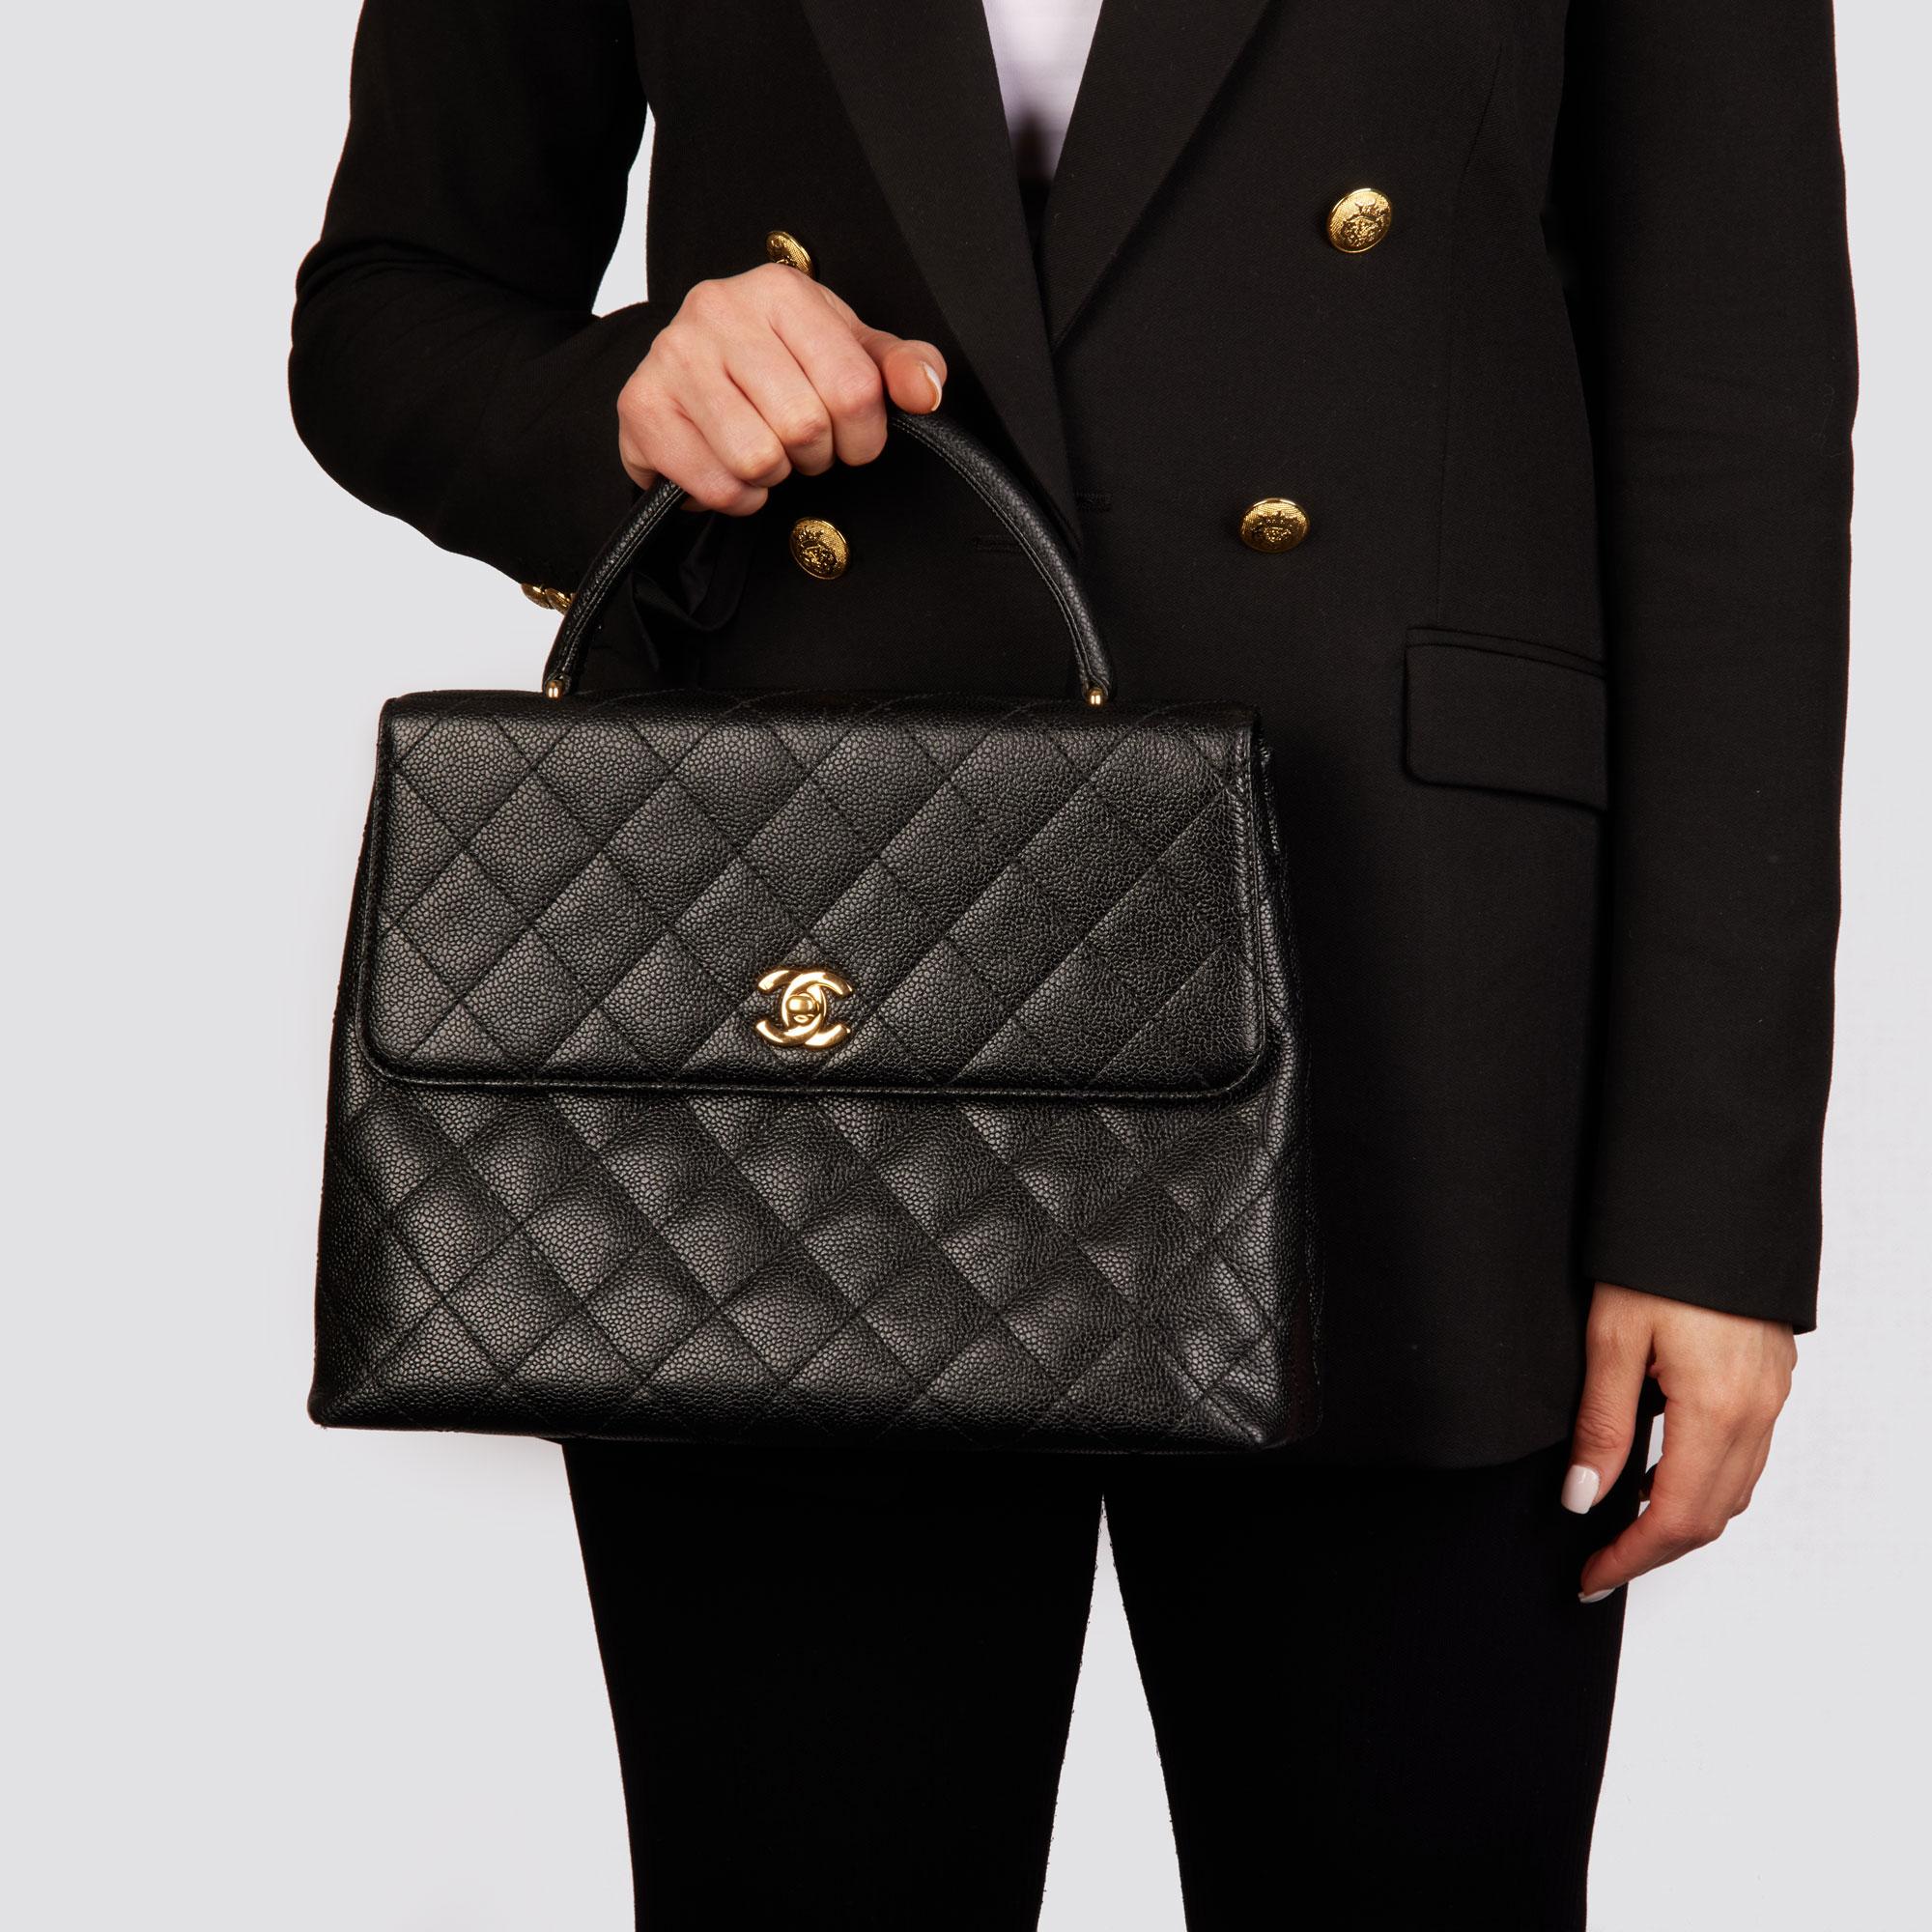 CHANEL Black Quilted Caviar Leather Vintage Classic Kelly 7